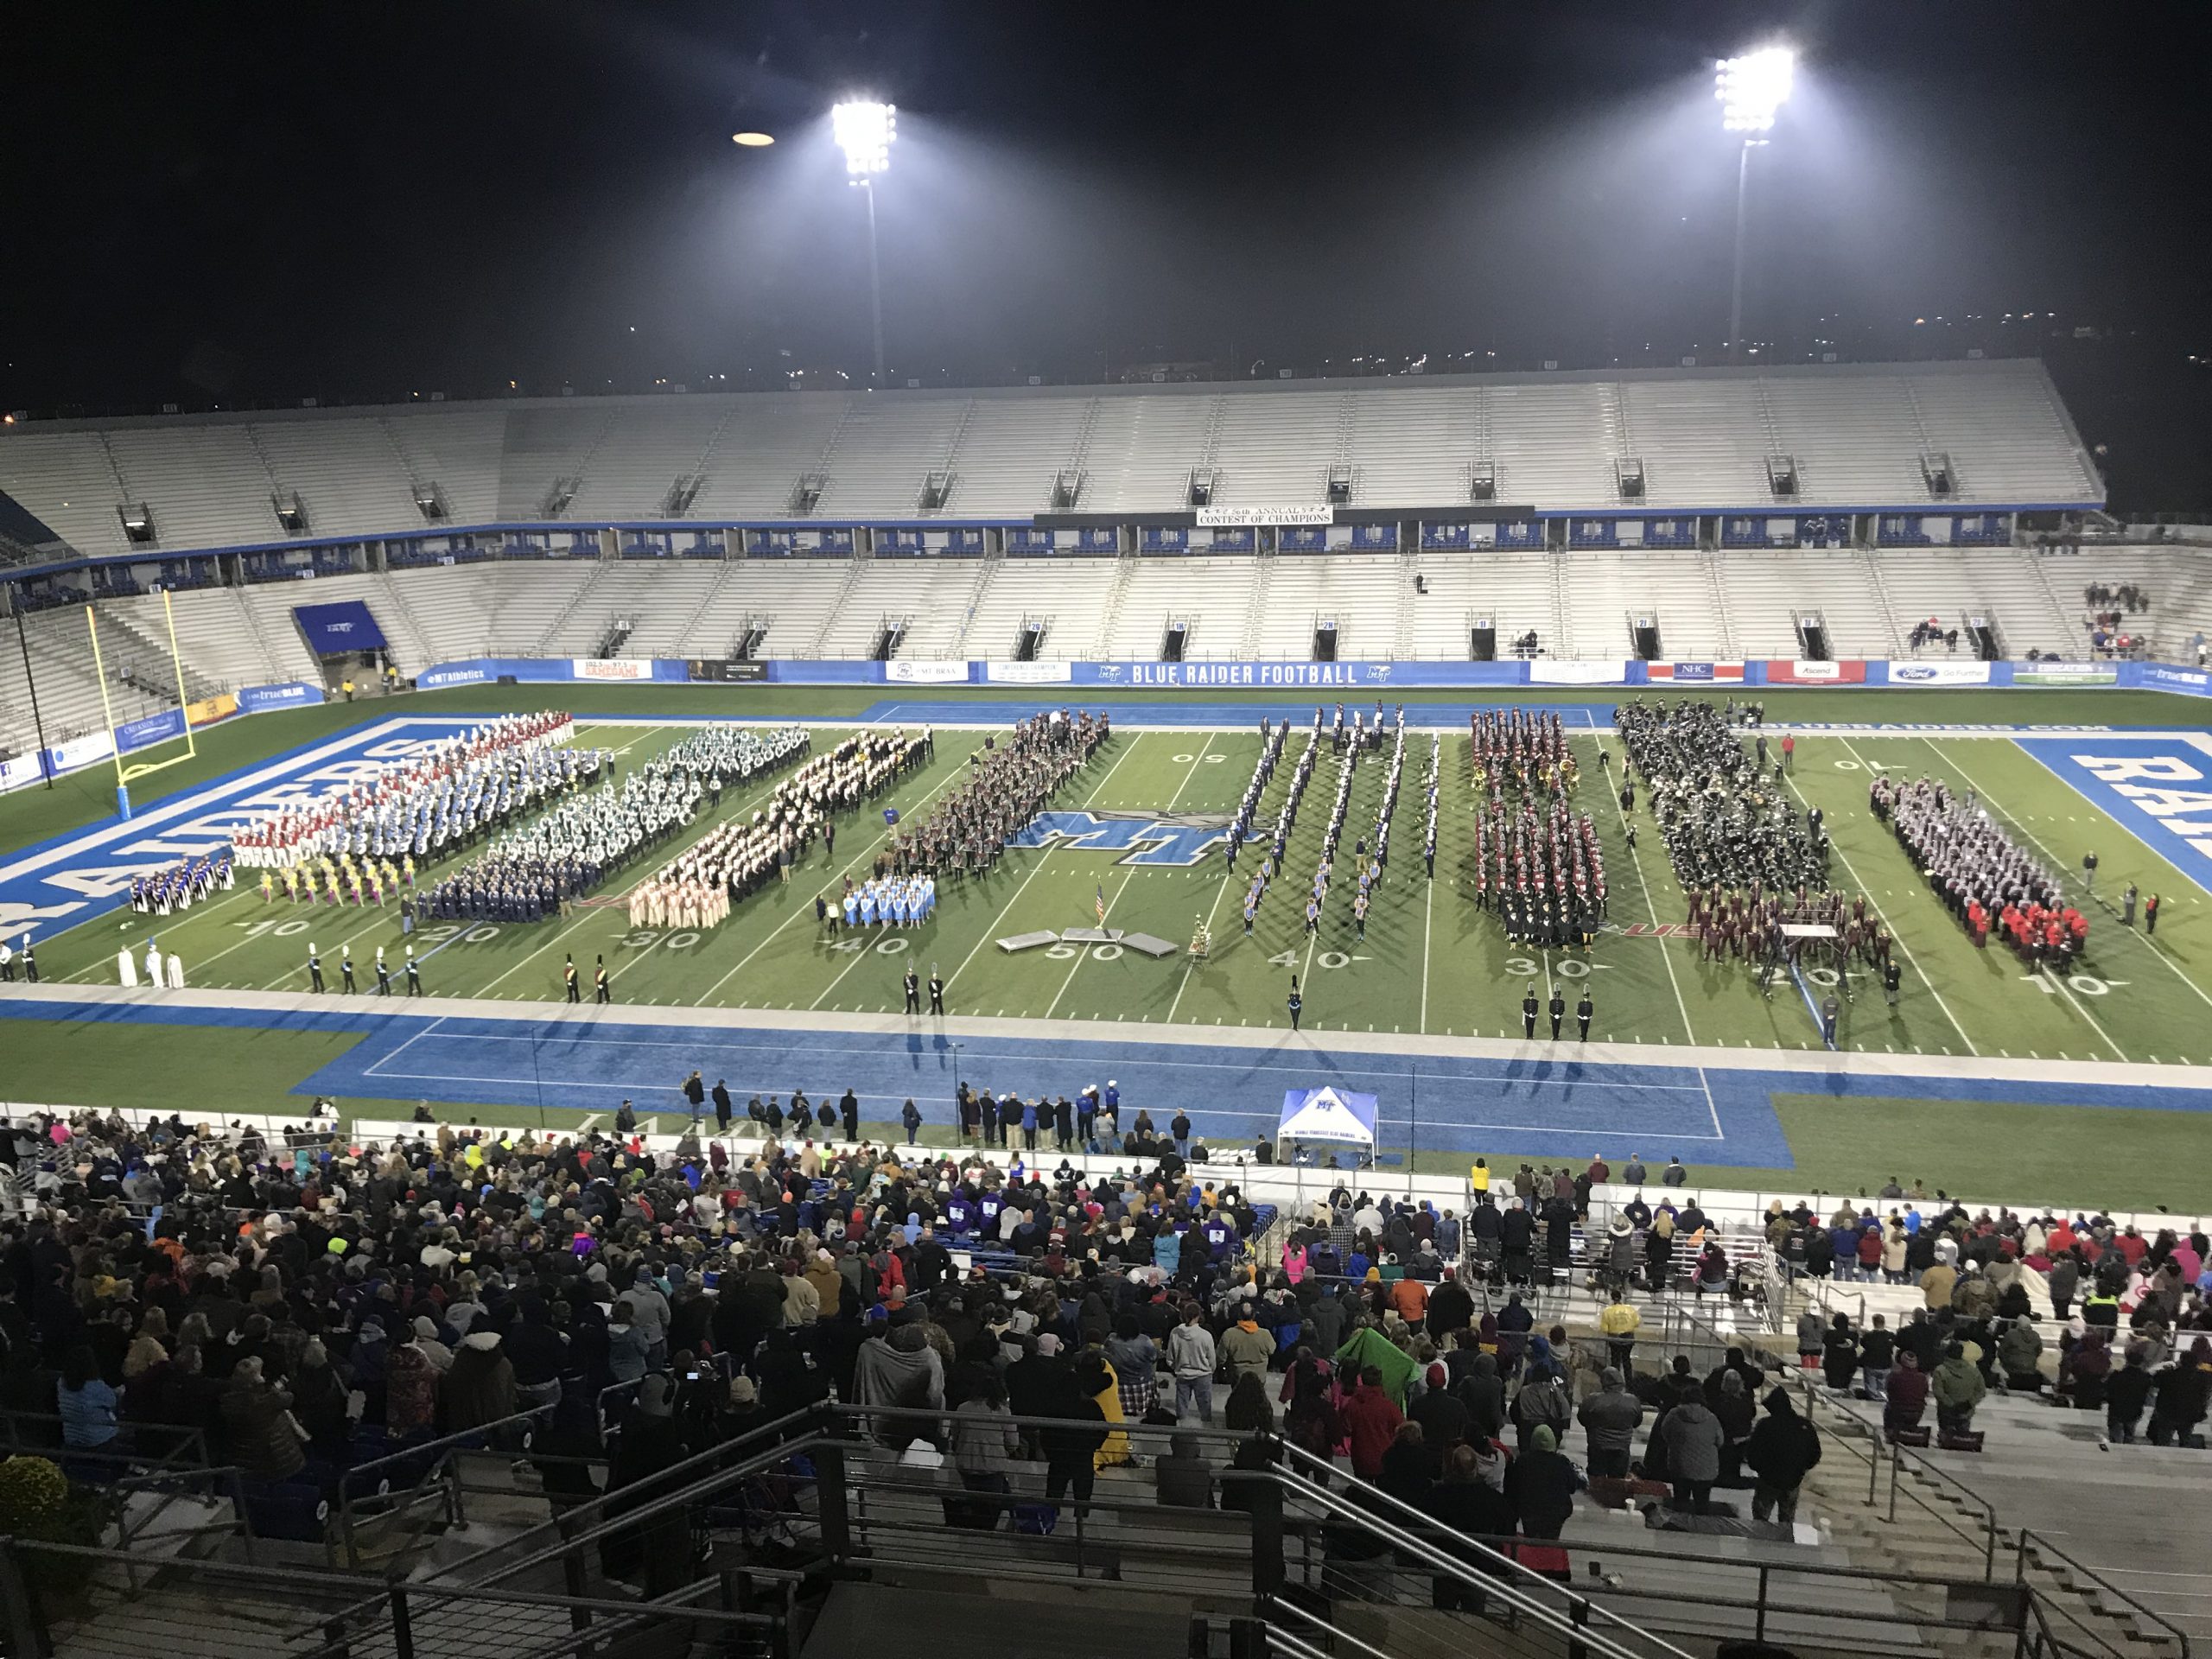 Finalists line up in ranks to fill the field for retreat at MTSU. Each band plays a snippet of their show prior to exiting the field.